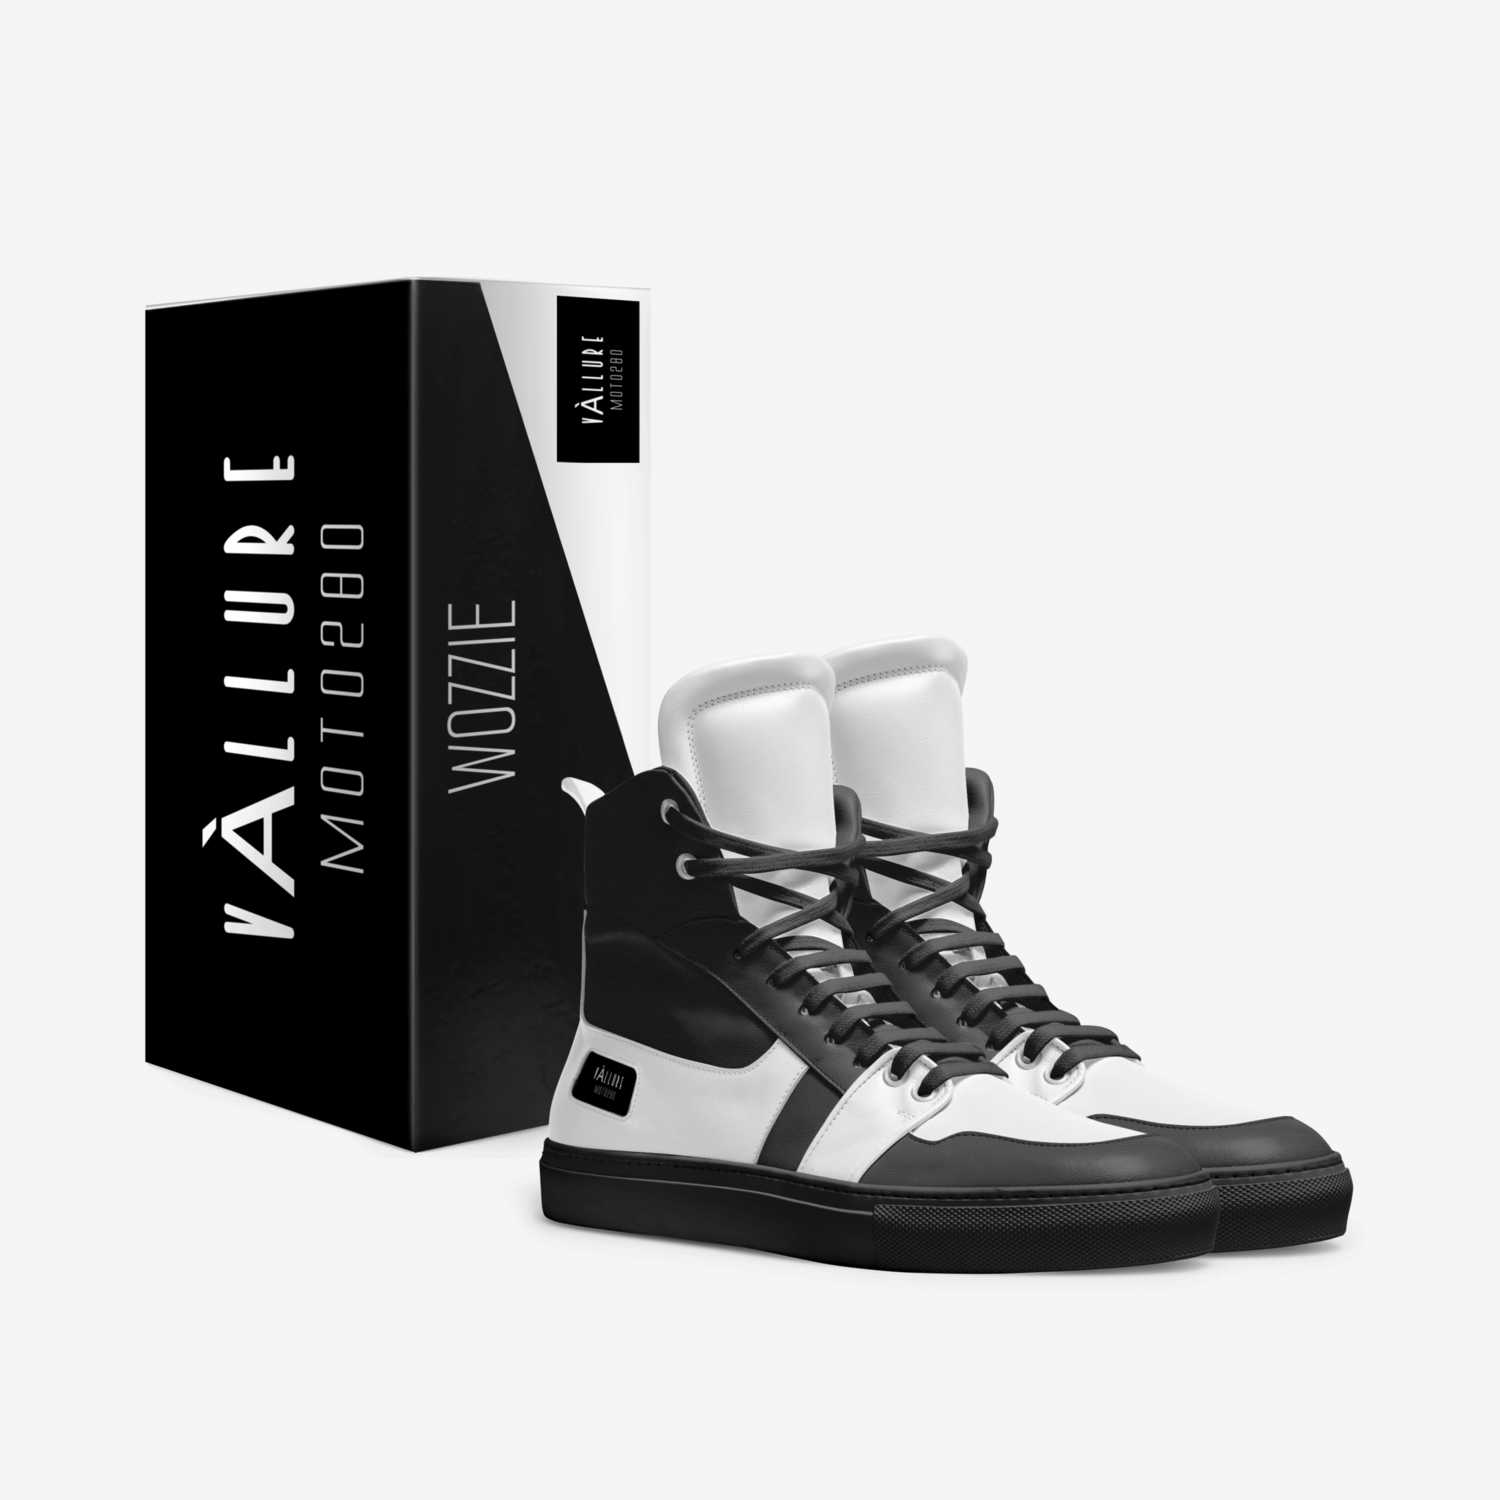 VÀLLURE Moto280 custom made in Italy shoes by Wayne Redmond | Box view